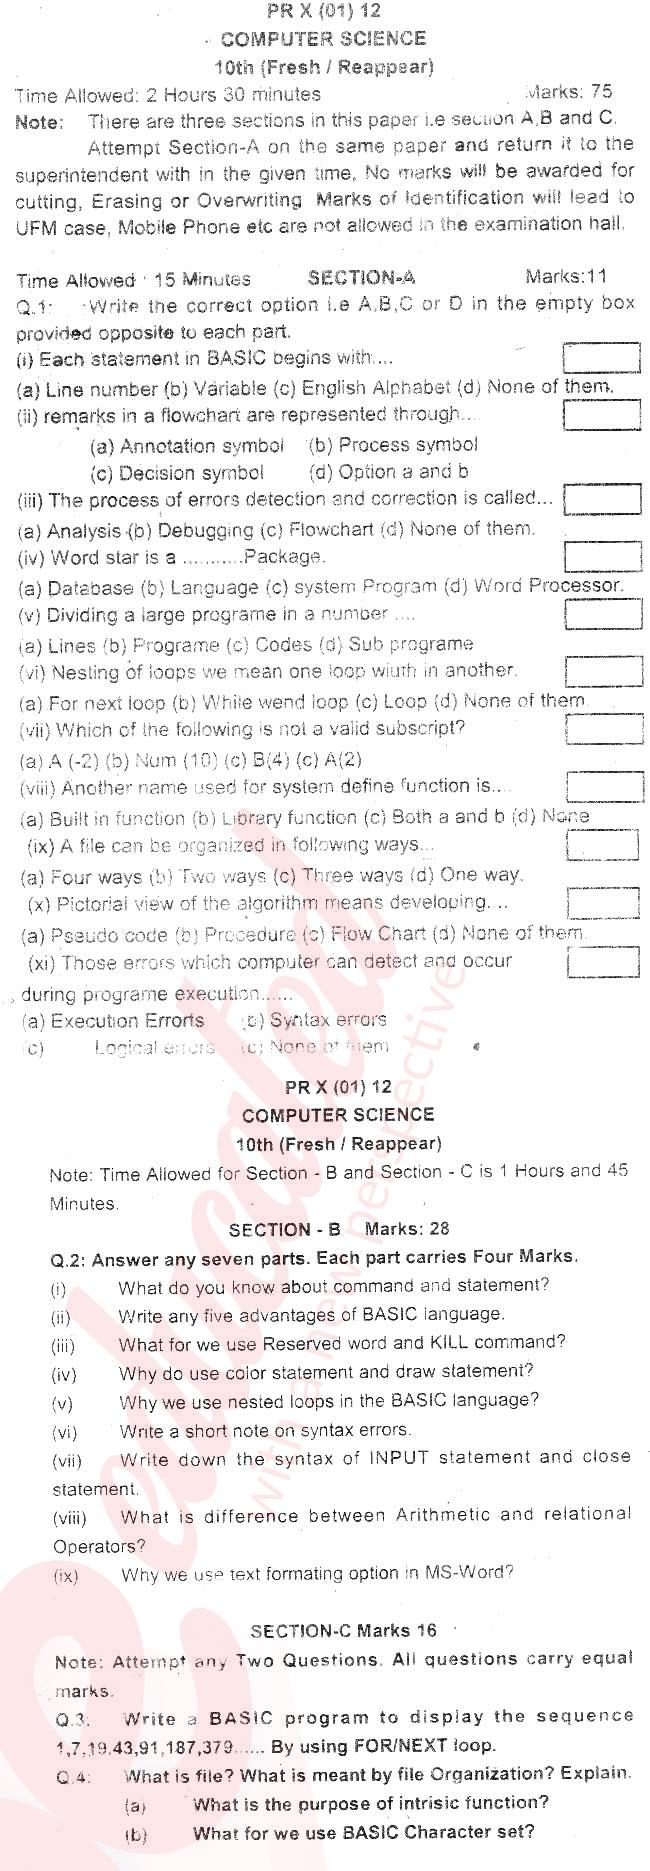 Computer Science 10th English Medium Past Paper Group 1 BISE Bannu 2012